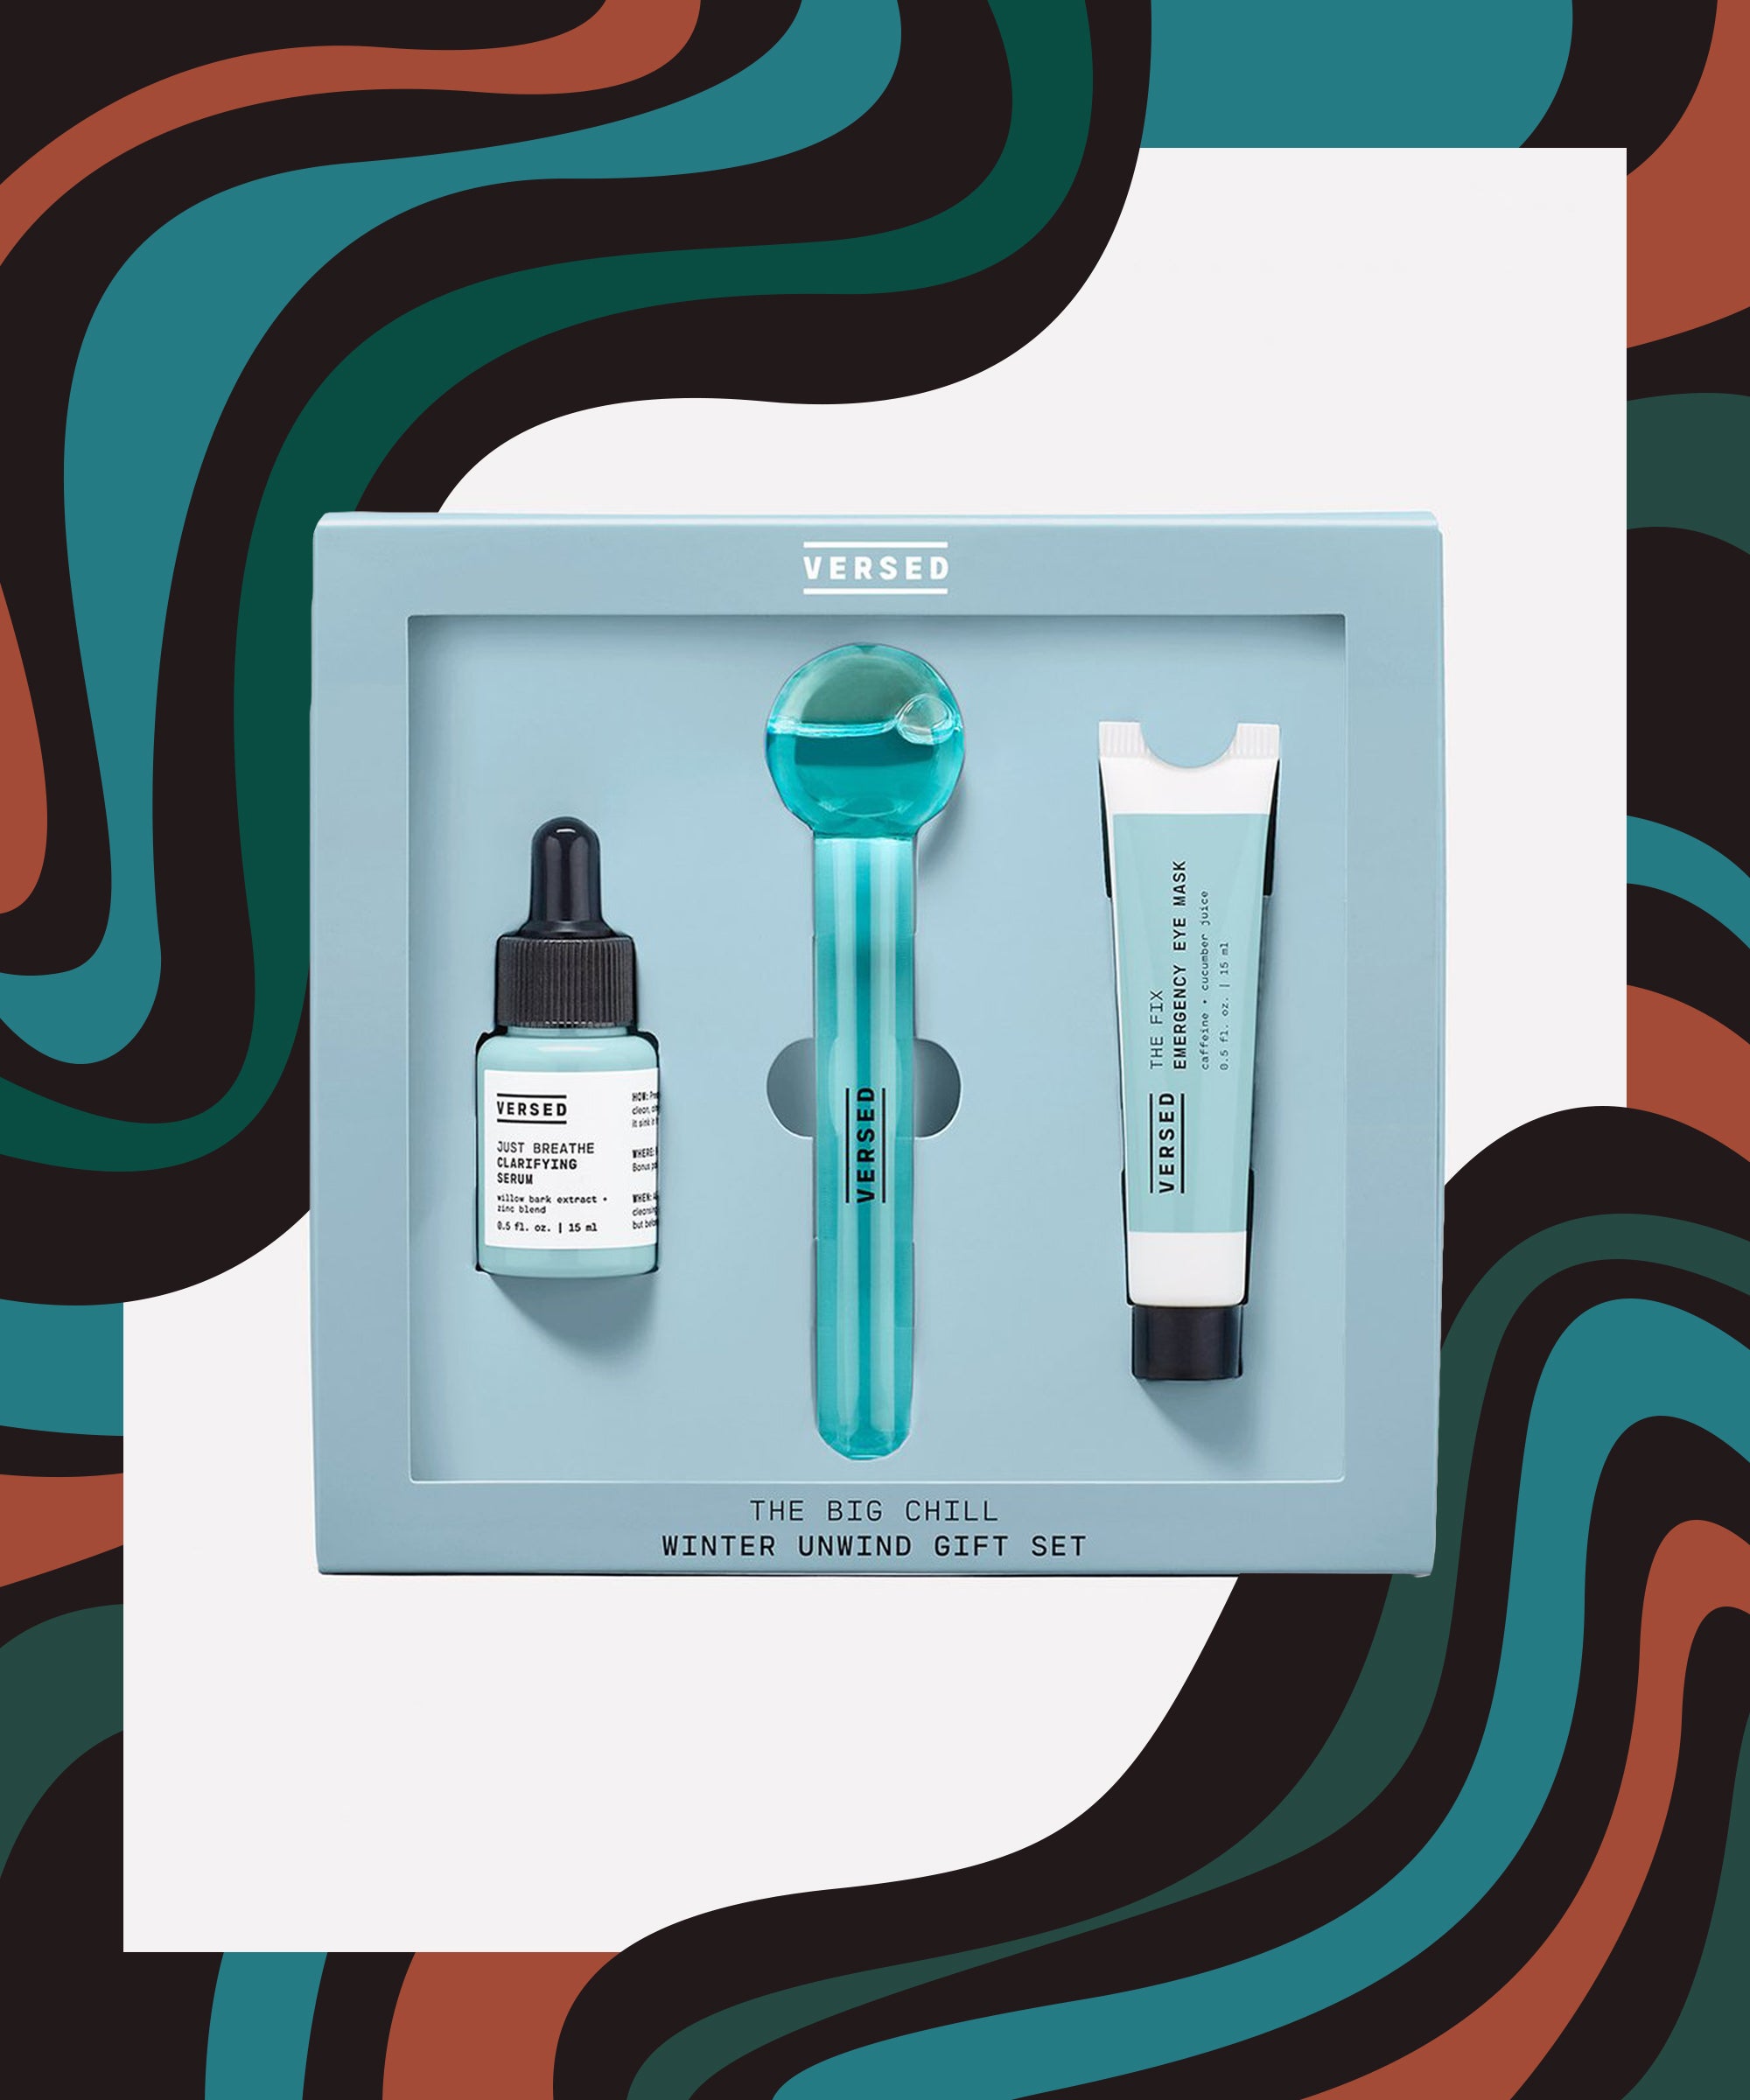 Best Skin Care Gift Sets 2020 For Every Beauty Lover